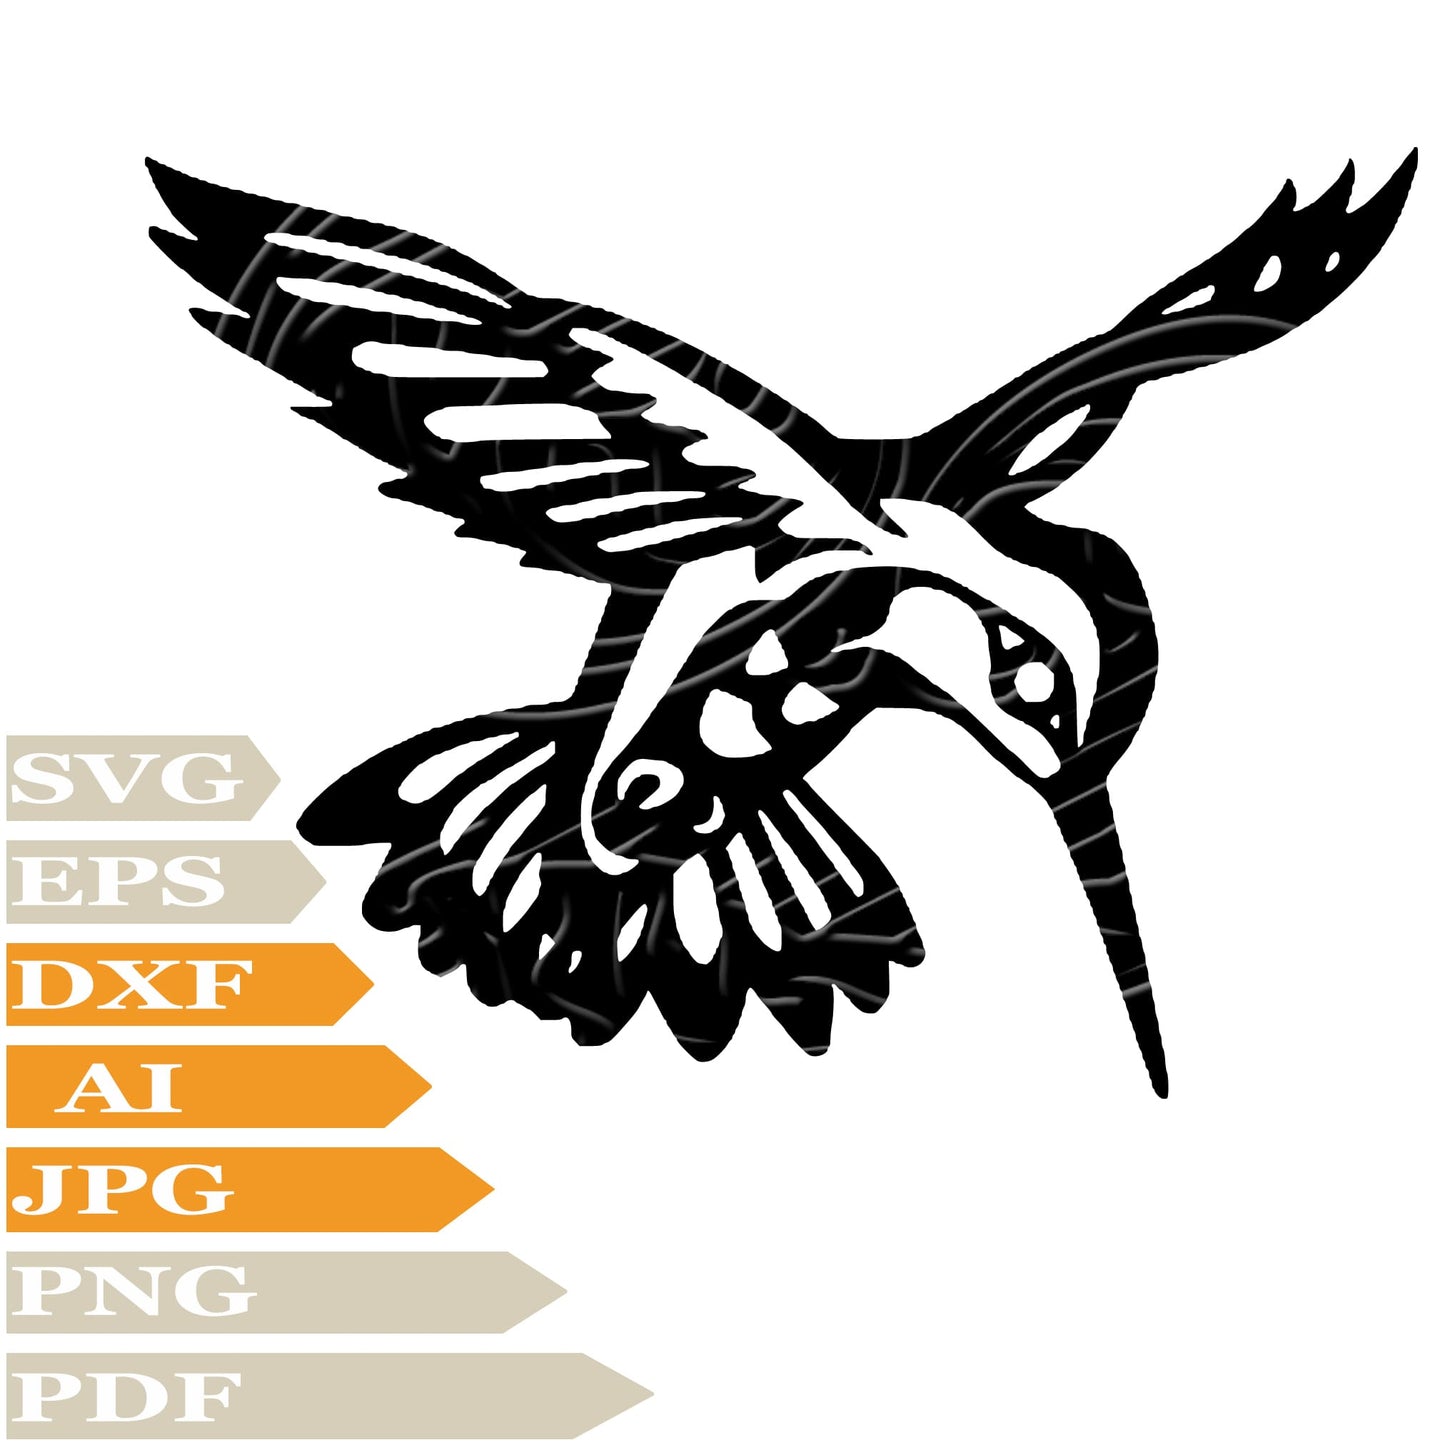 Hummingbird, Hummingbird Open Wings Svg File, Image Cut, Png, For Tattoo, Silhouette, Digital Vector Download, Cut File, Clipart, For Cricut